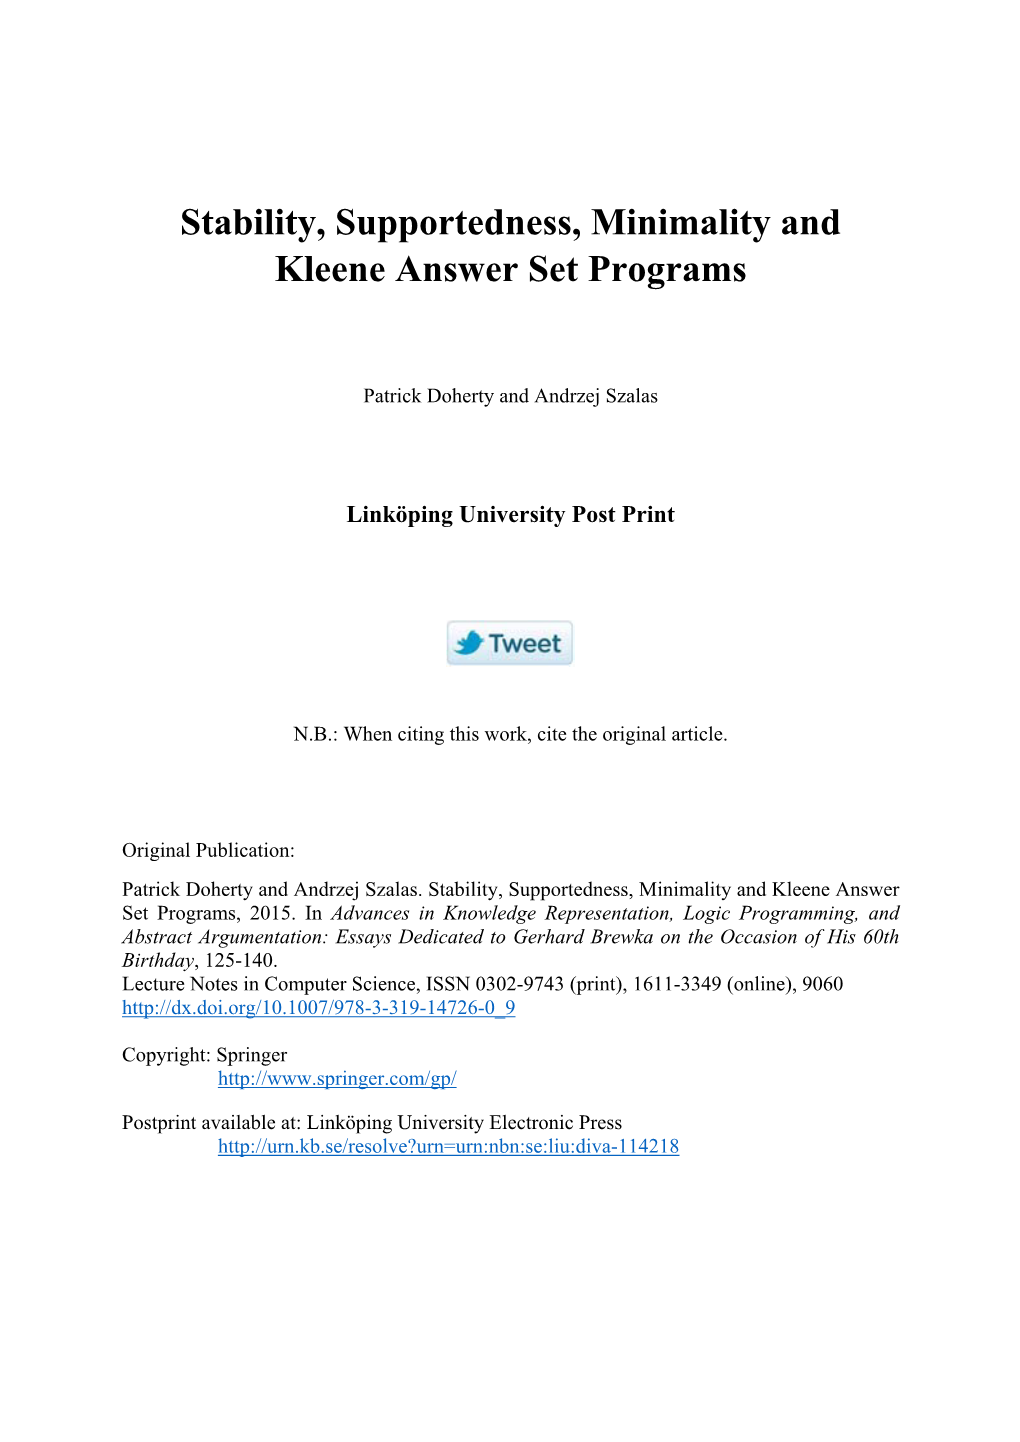 Stability, Supportedness, Minimality and Kleene Answer Set Programs